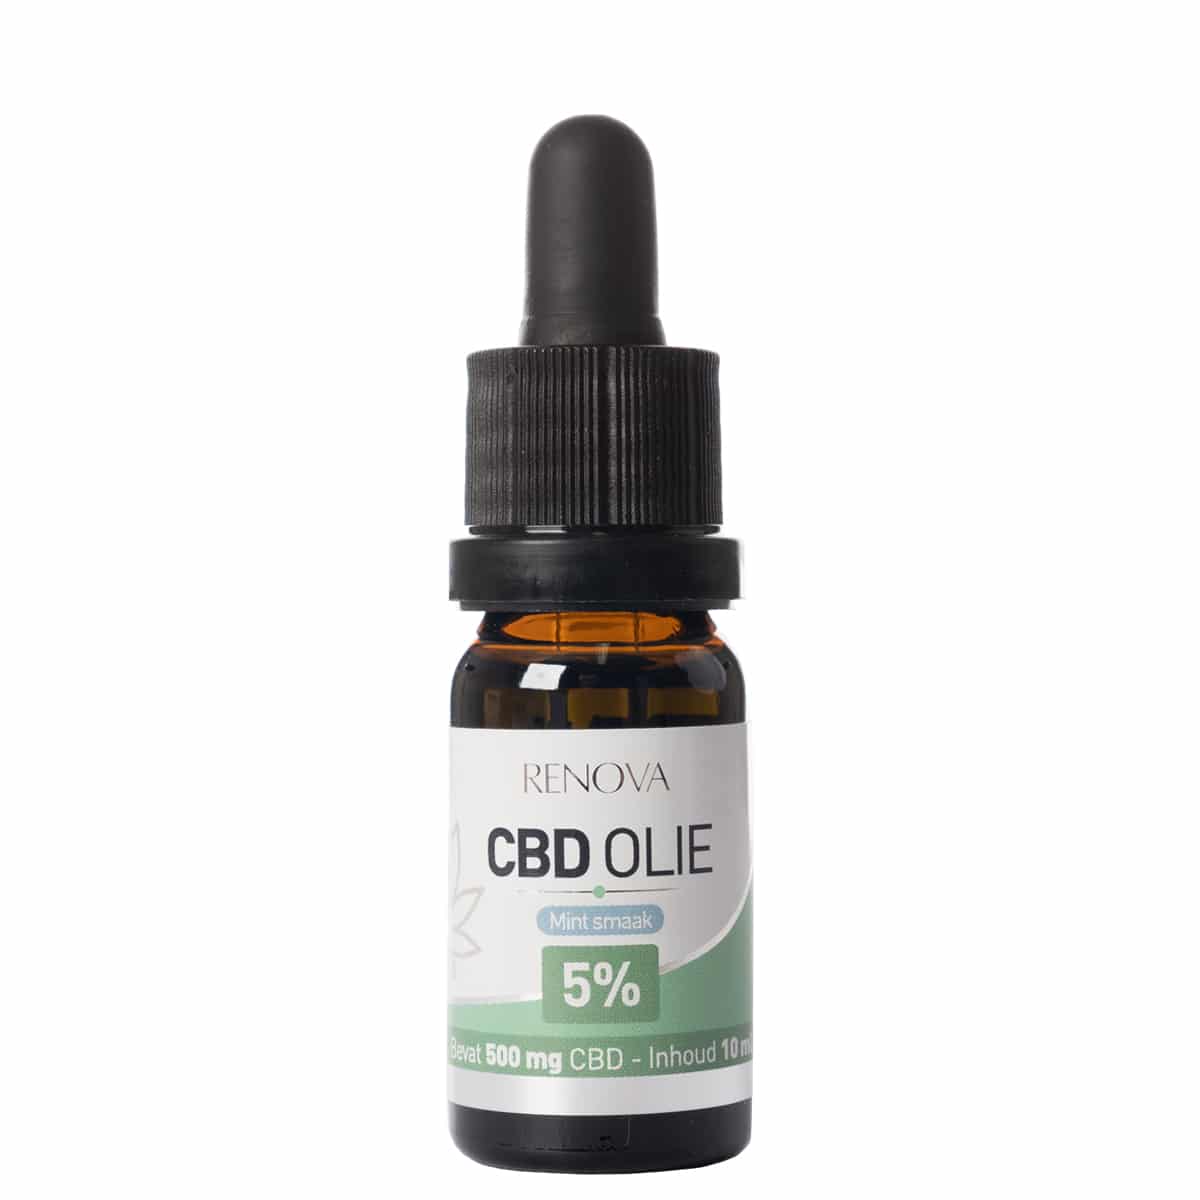 A bottle of Renova peppermint-infused CBD oil 5% on a white background.